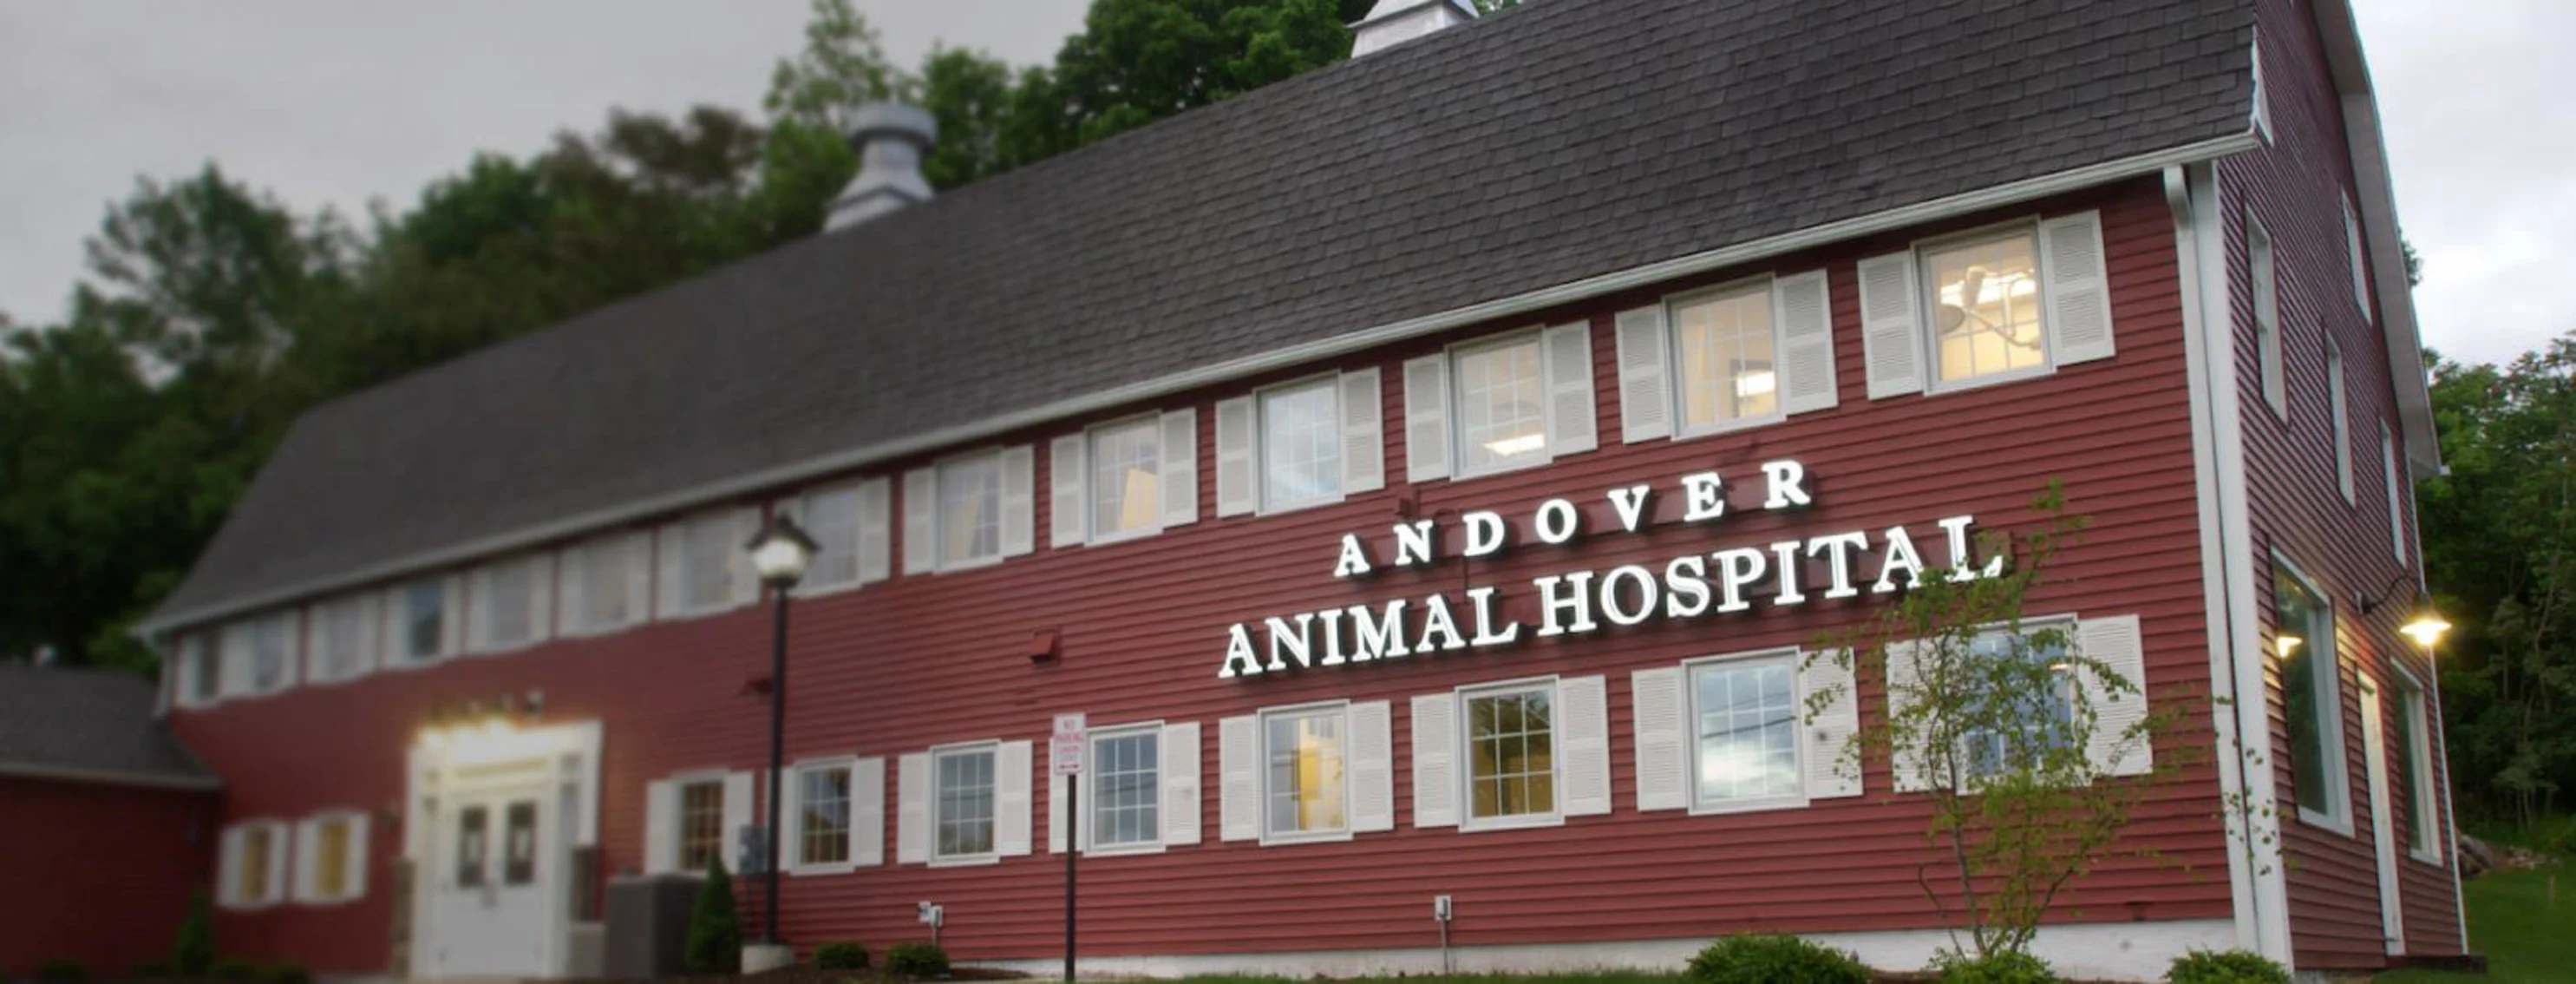 Exterior of Andover Animal Hospital's signature red barn in Newton, NJ